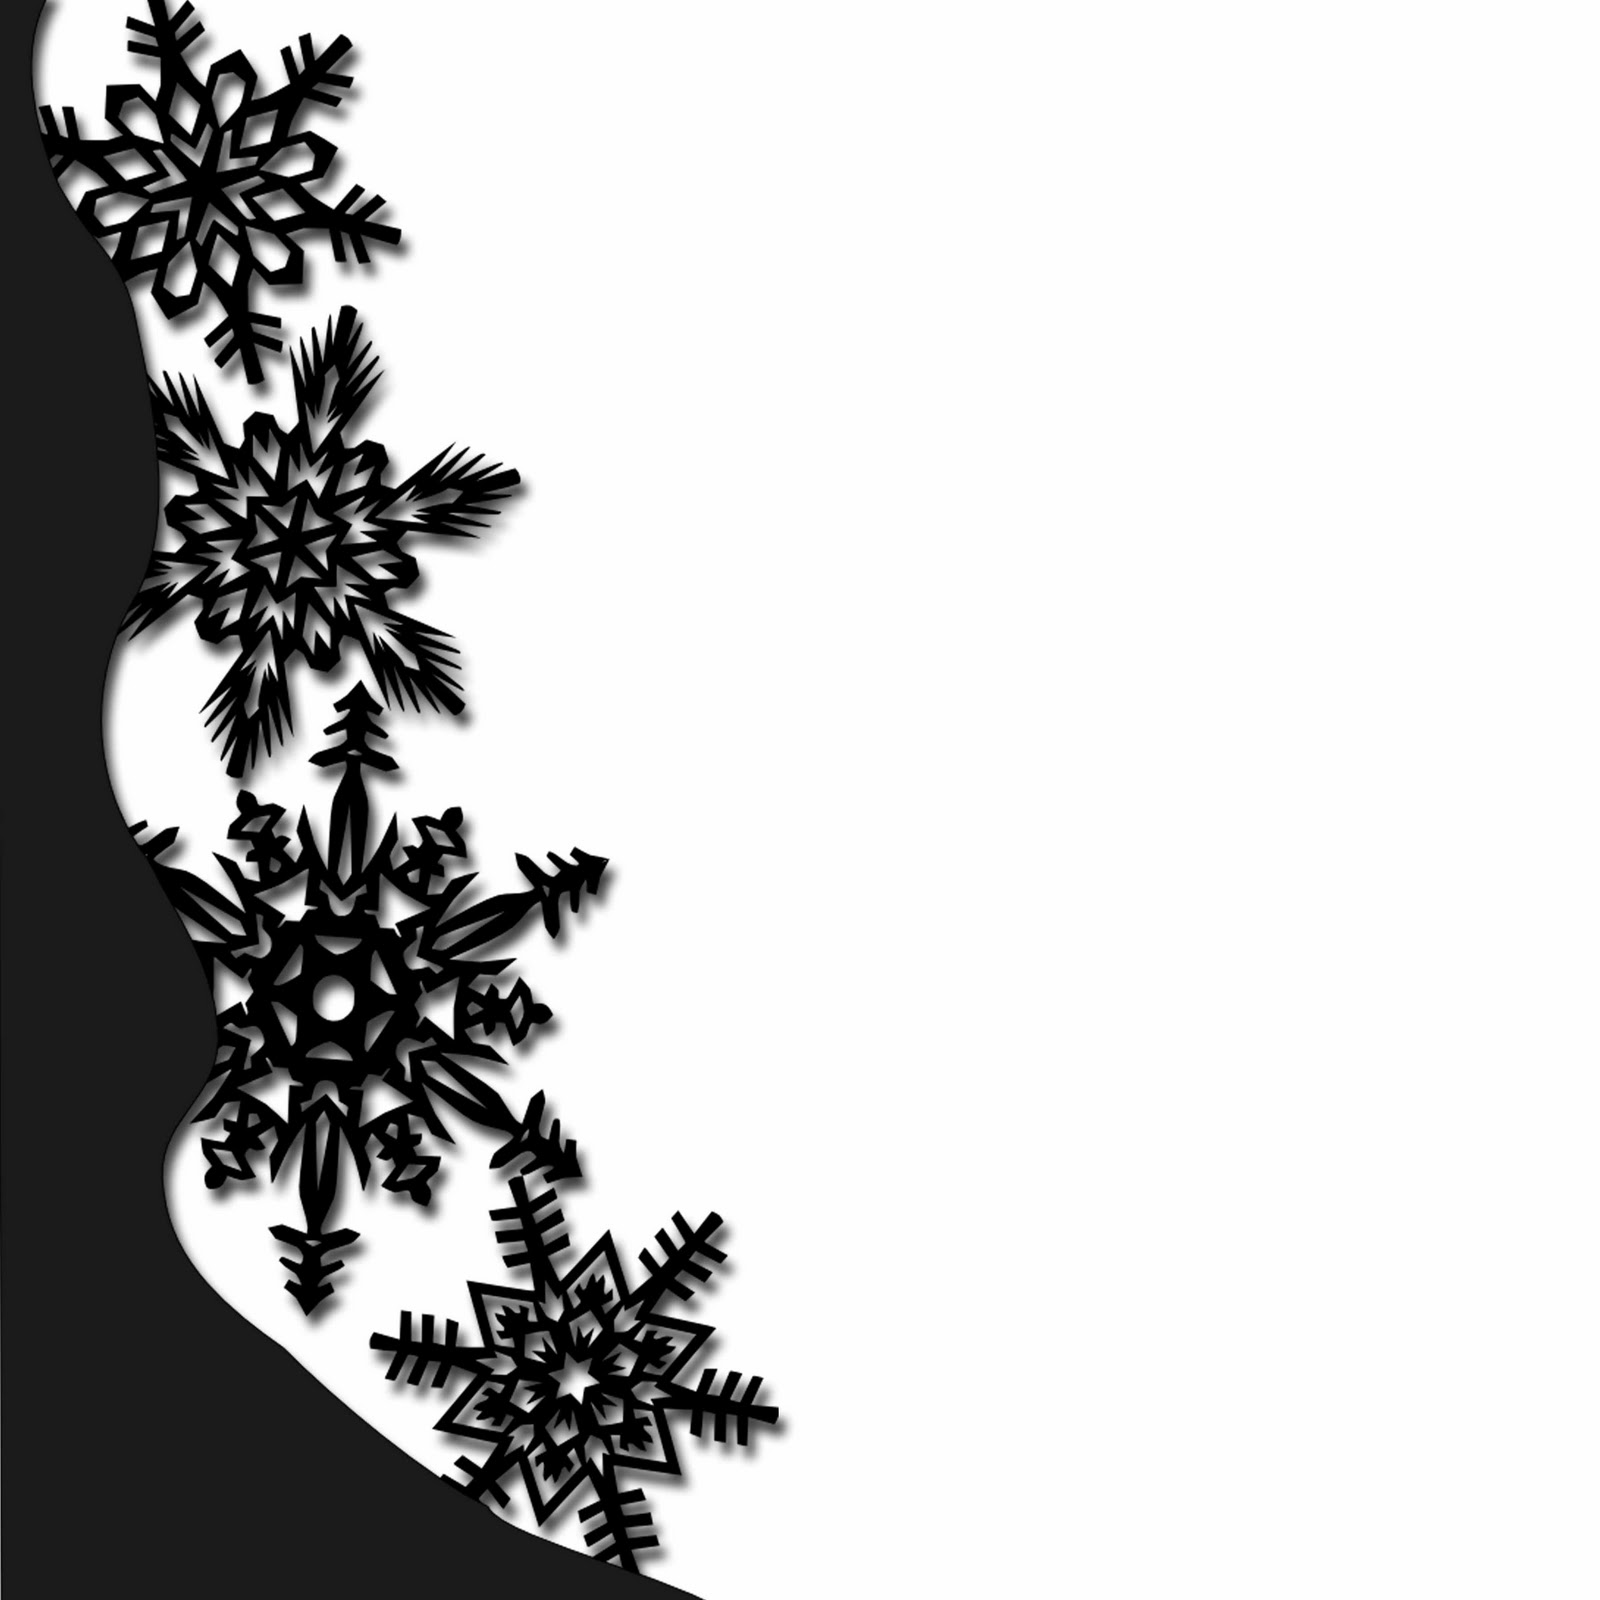 Snowflake page border clipart